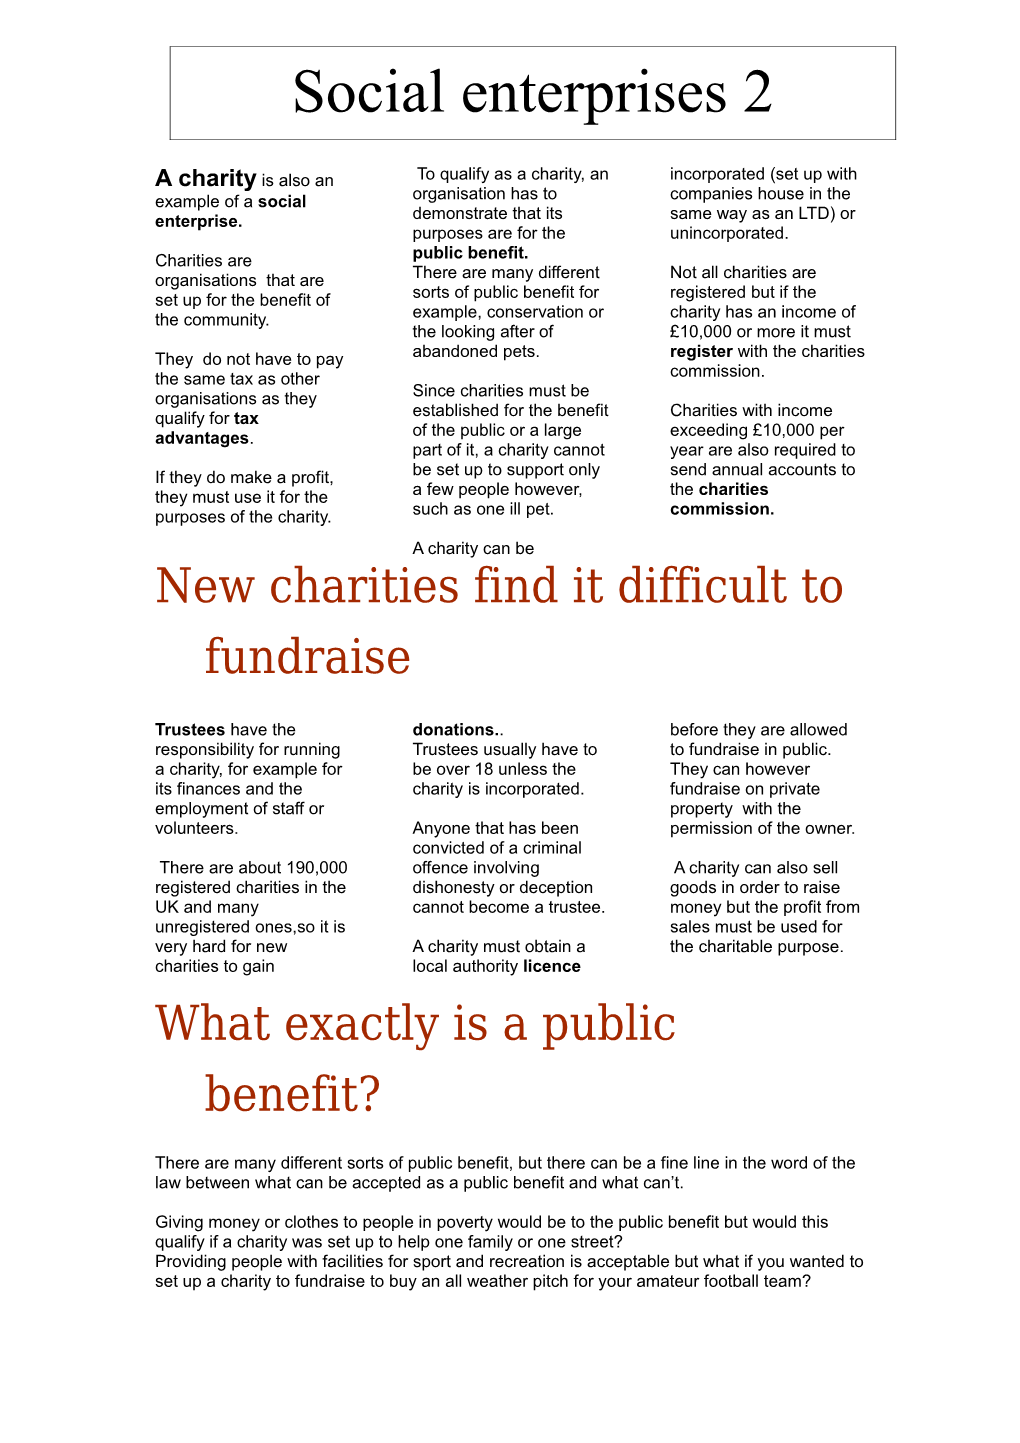 A Charity Is Also an Example of a Social Enterprise